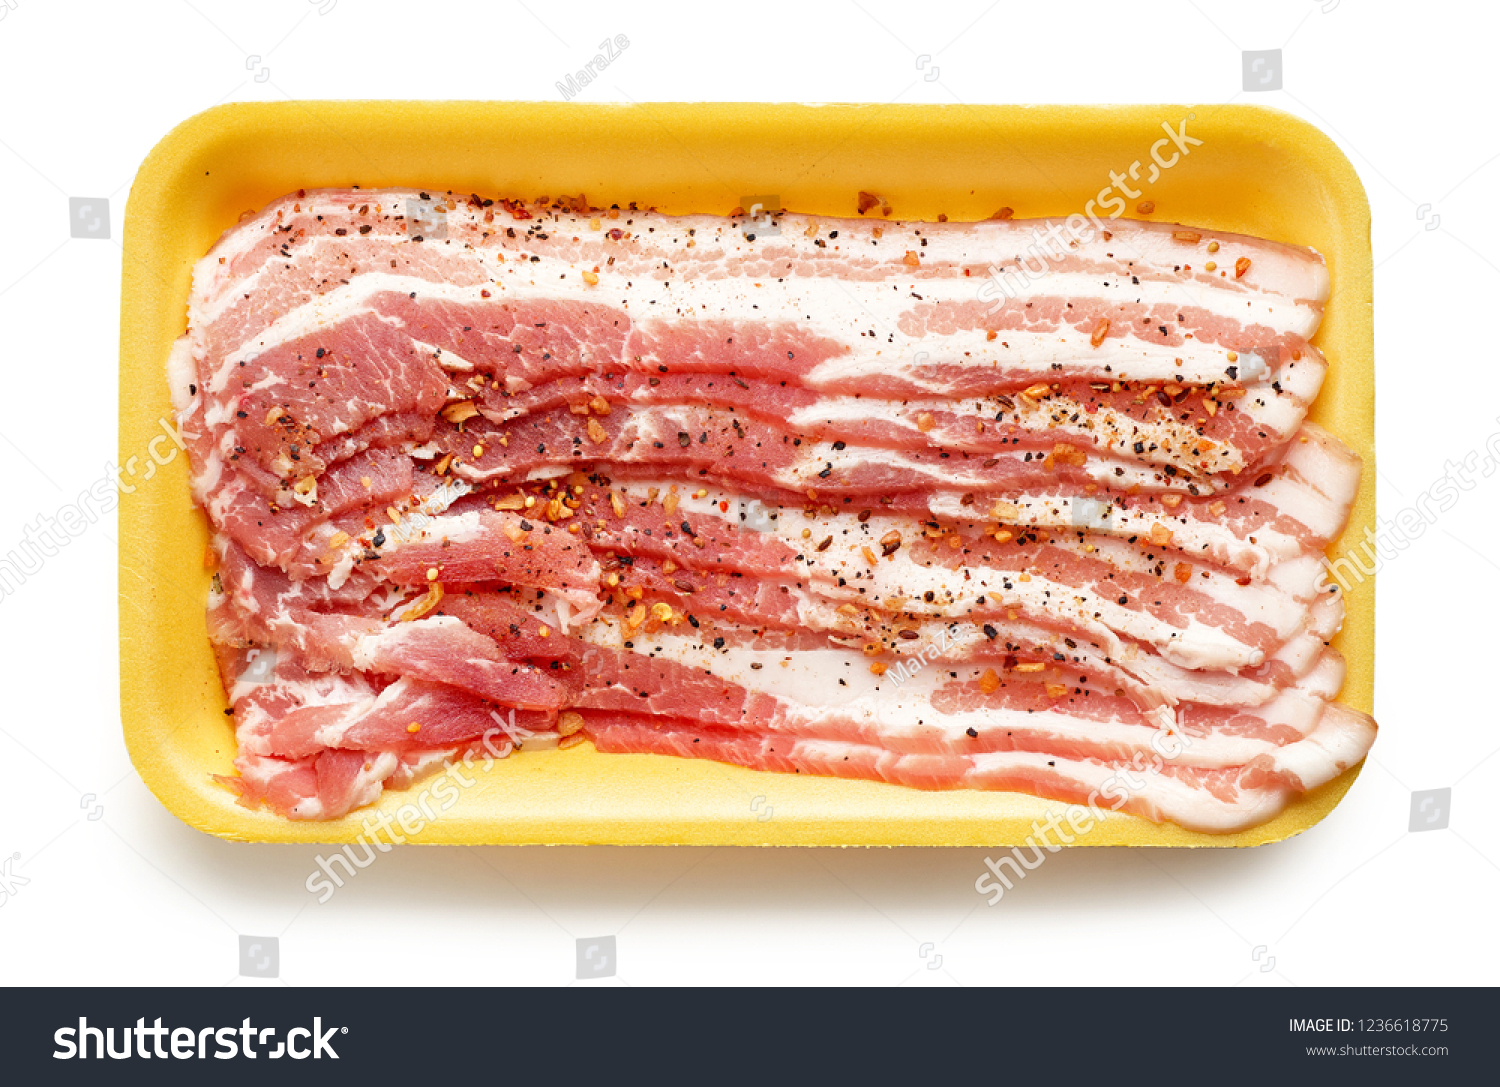 Download Yellow Plastic Tray Spicy Breakfast Bacon Stock Photo Edit Now 1236618775 PSD Mockup Templates